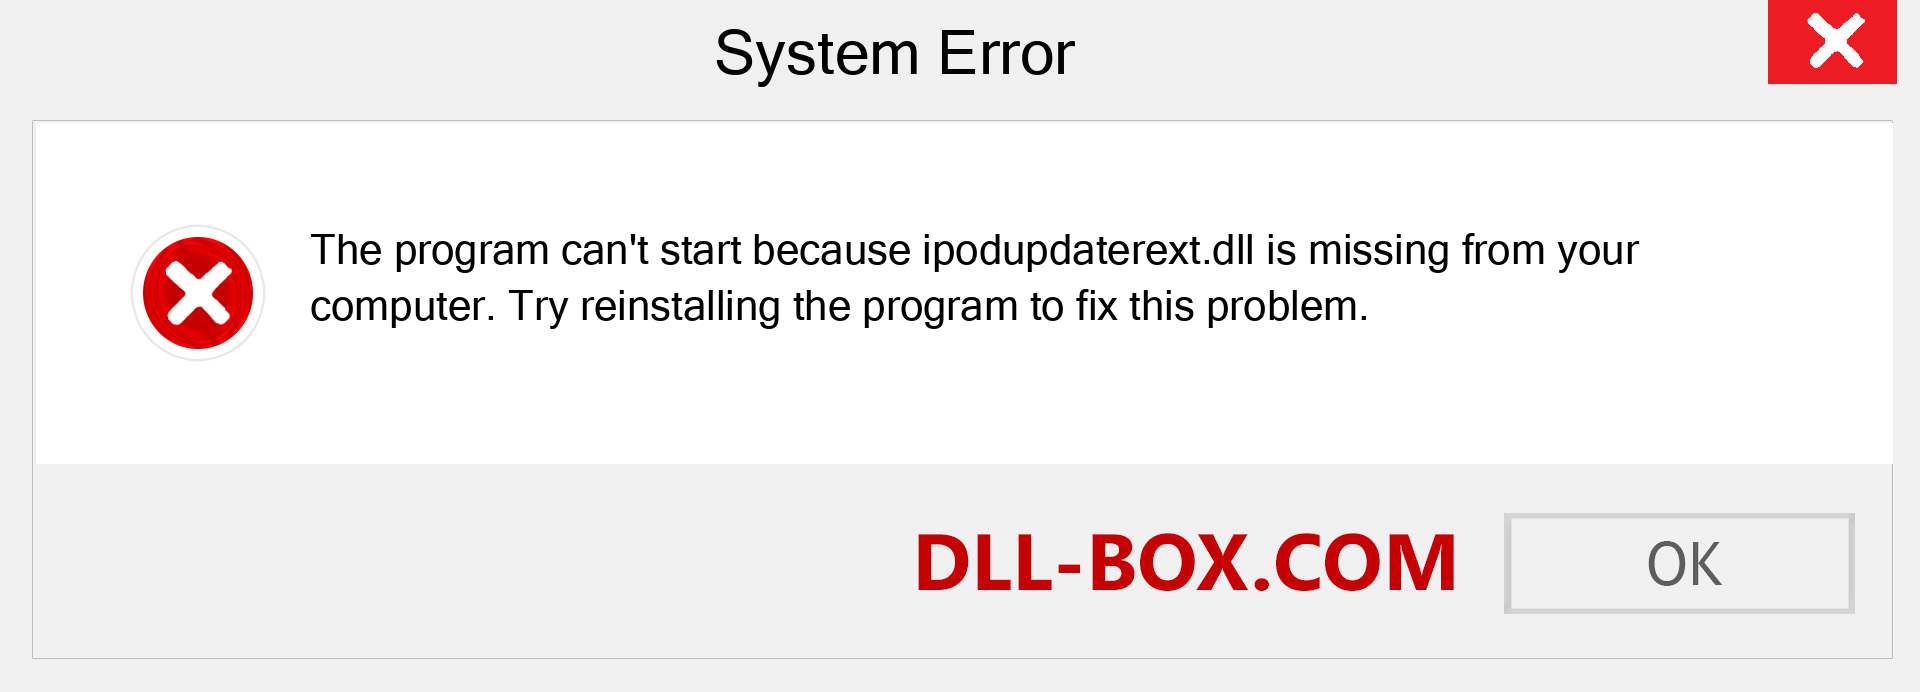  ipodupdaterext.dll file is missing?. Download for Windows 7, 8, 10 - Fix  ipodupdaterext dll Missing Error on Windows, photos, images